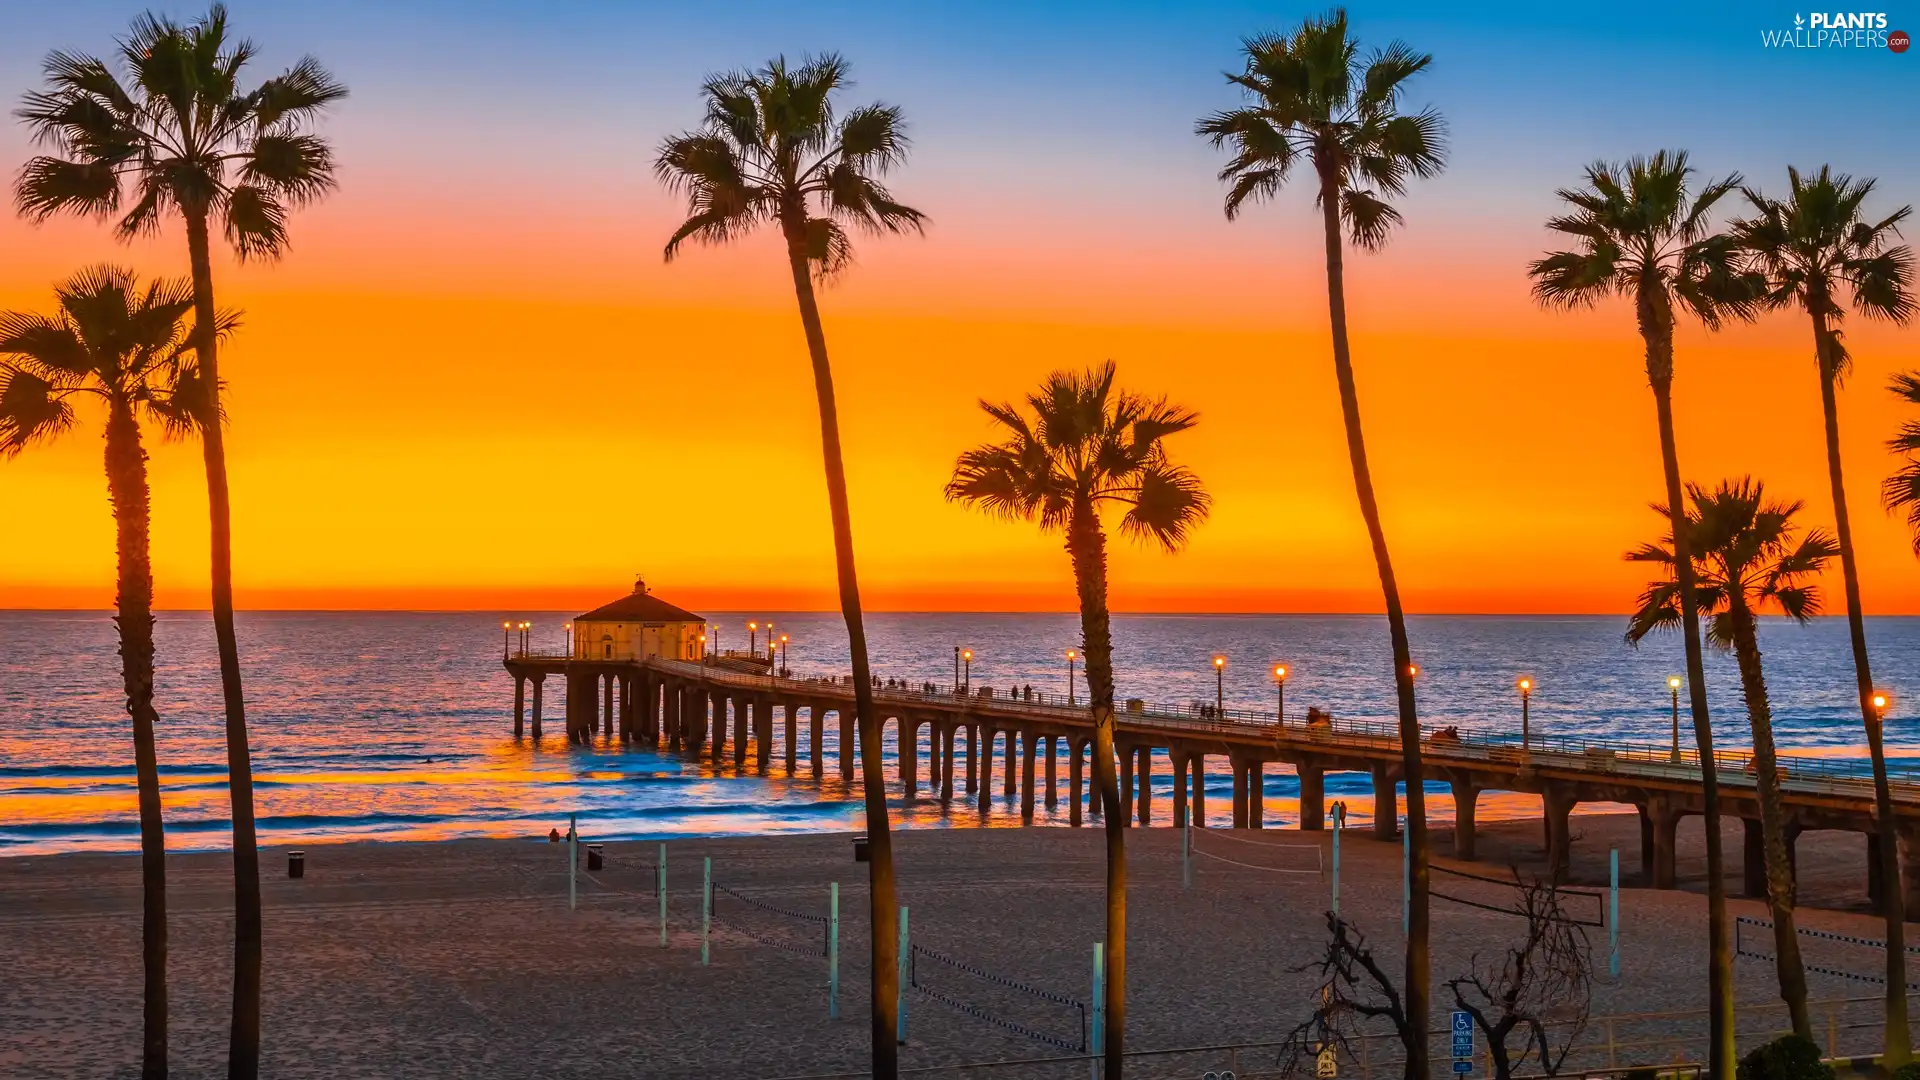 Palms, Great Sunsets, Beaches, pier, sea